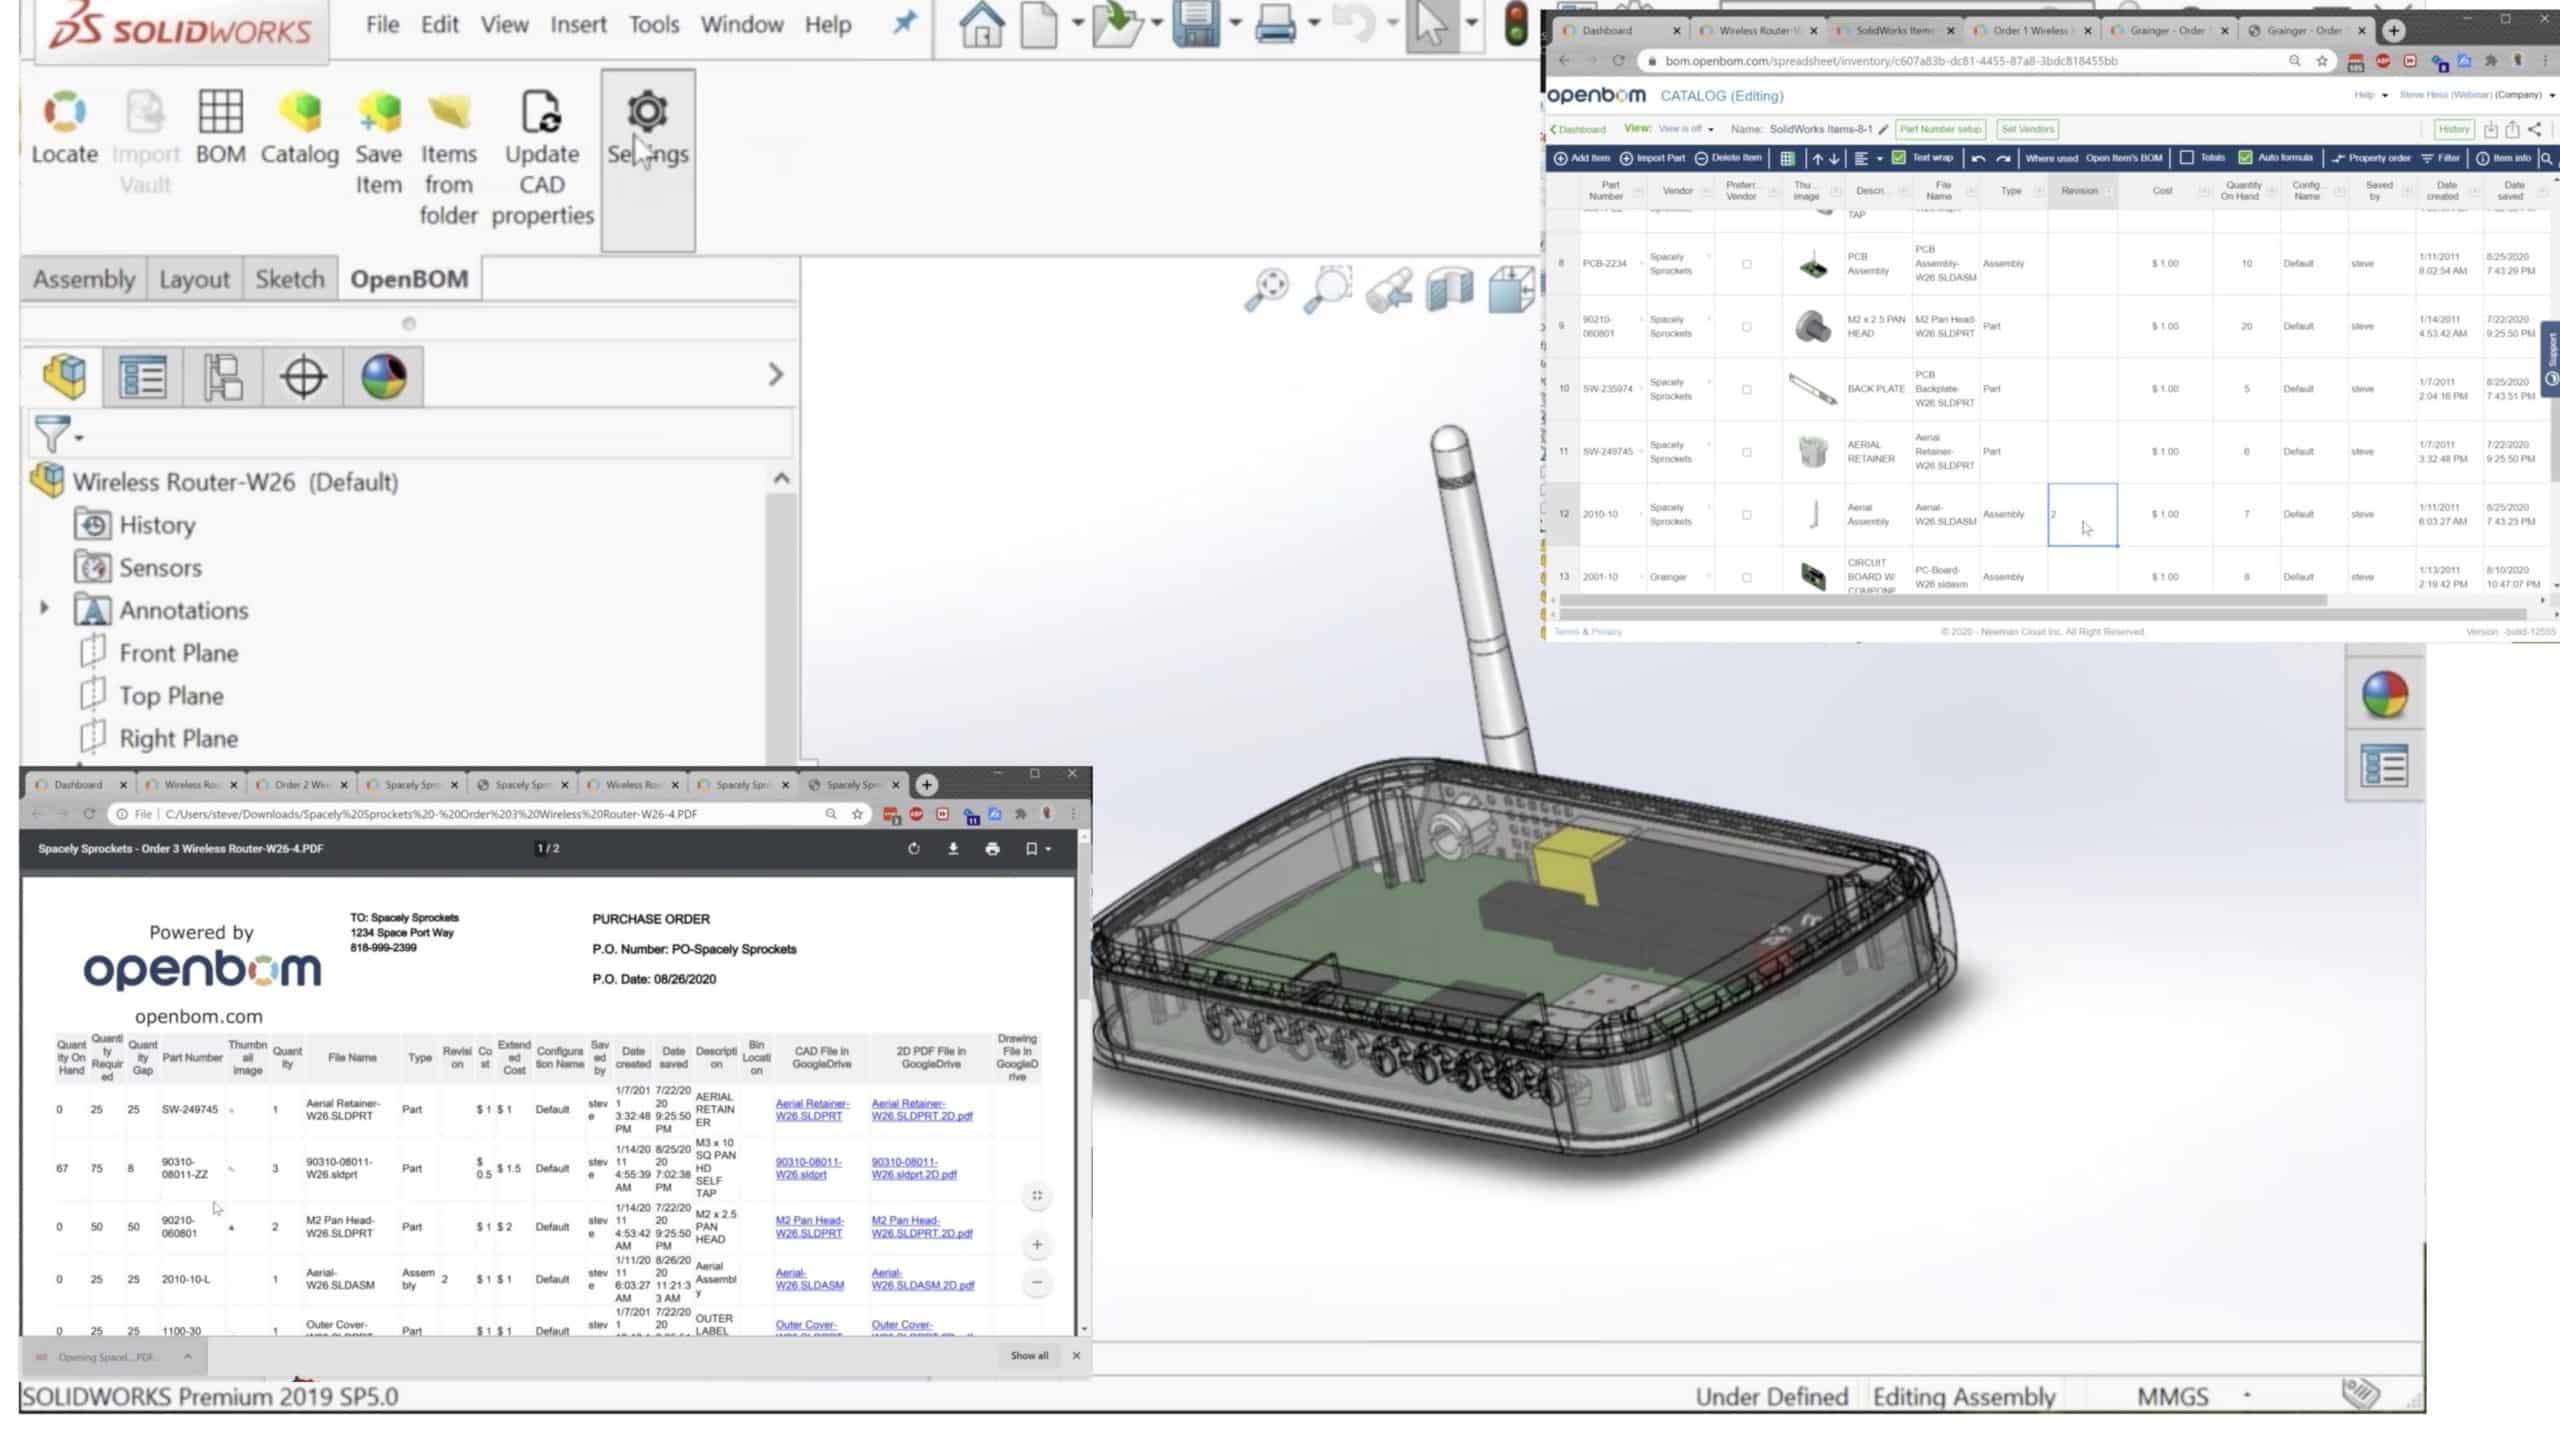 BOM Management for SOLIDWORKS (Design changes and Bill of Materials maintenance)